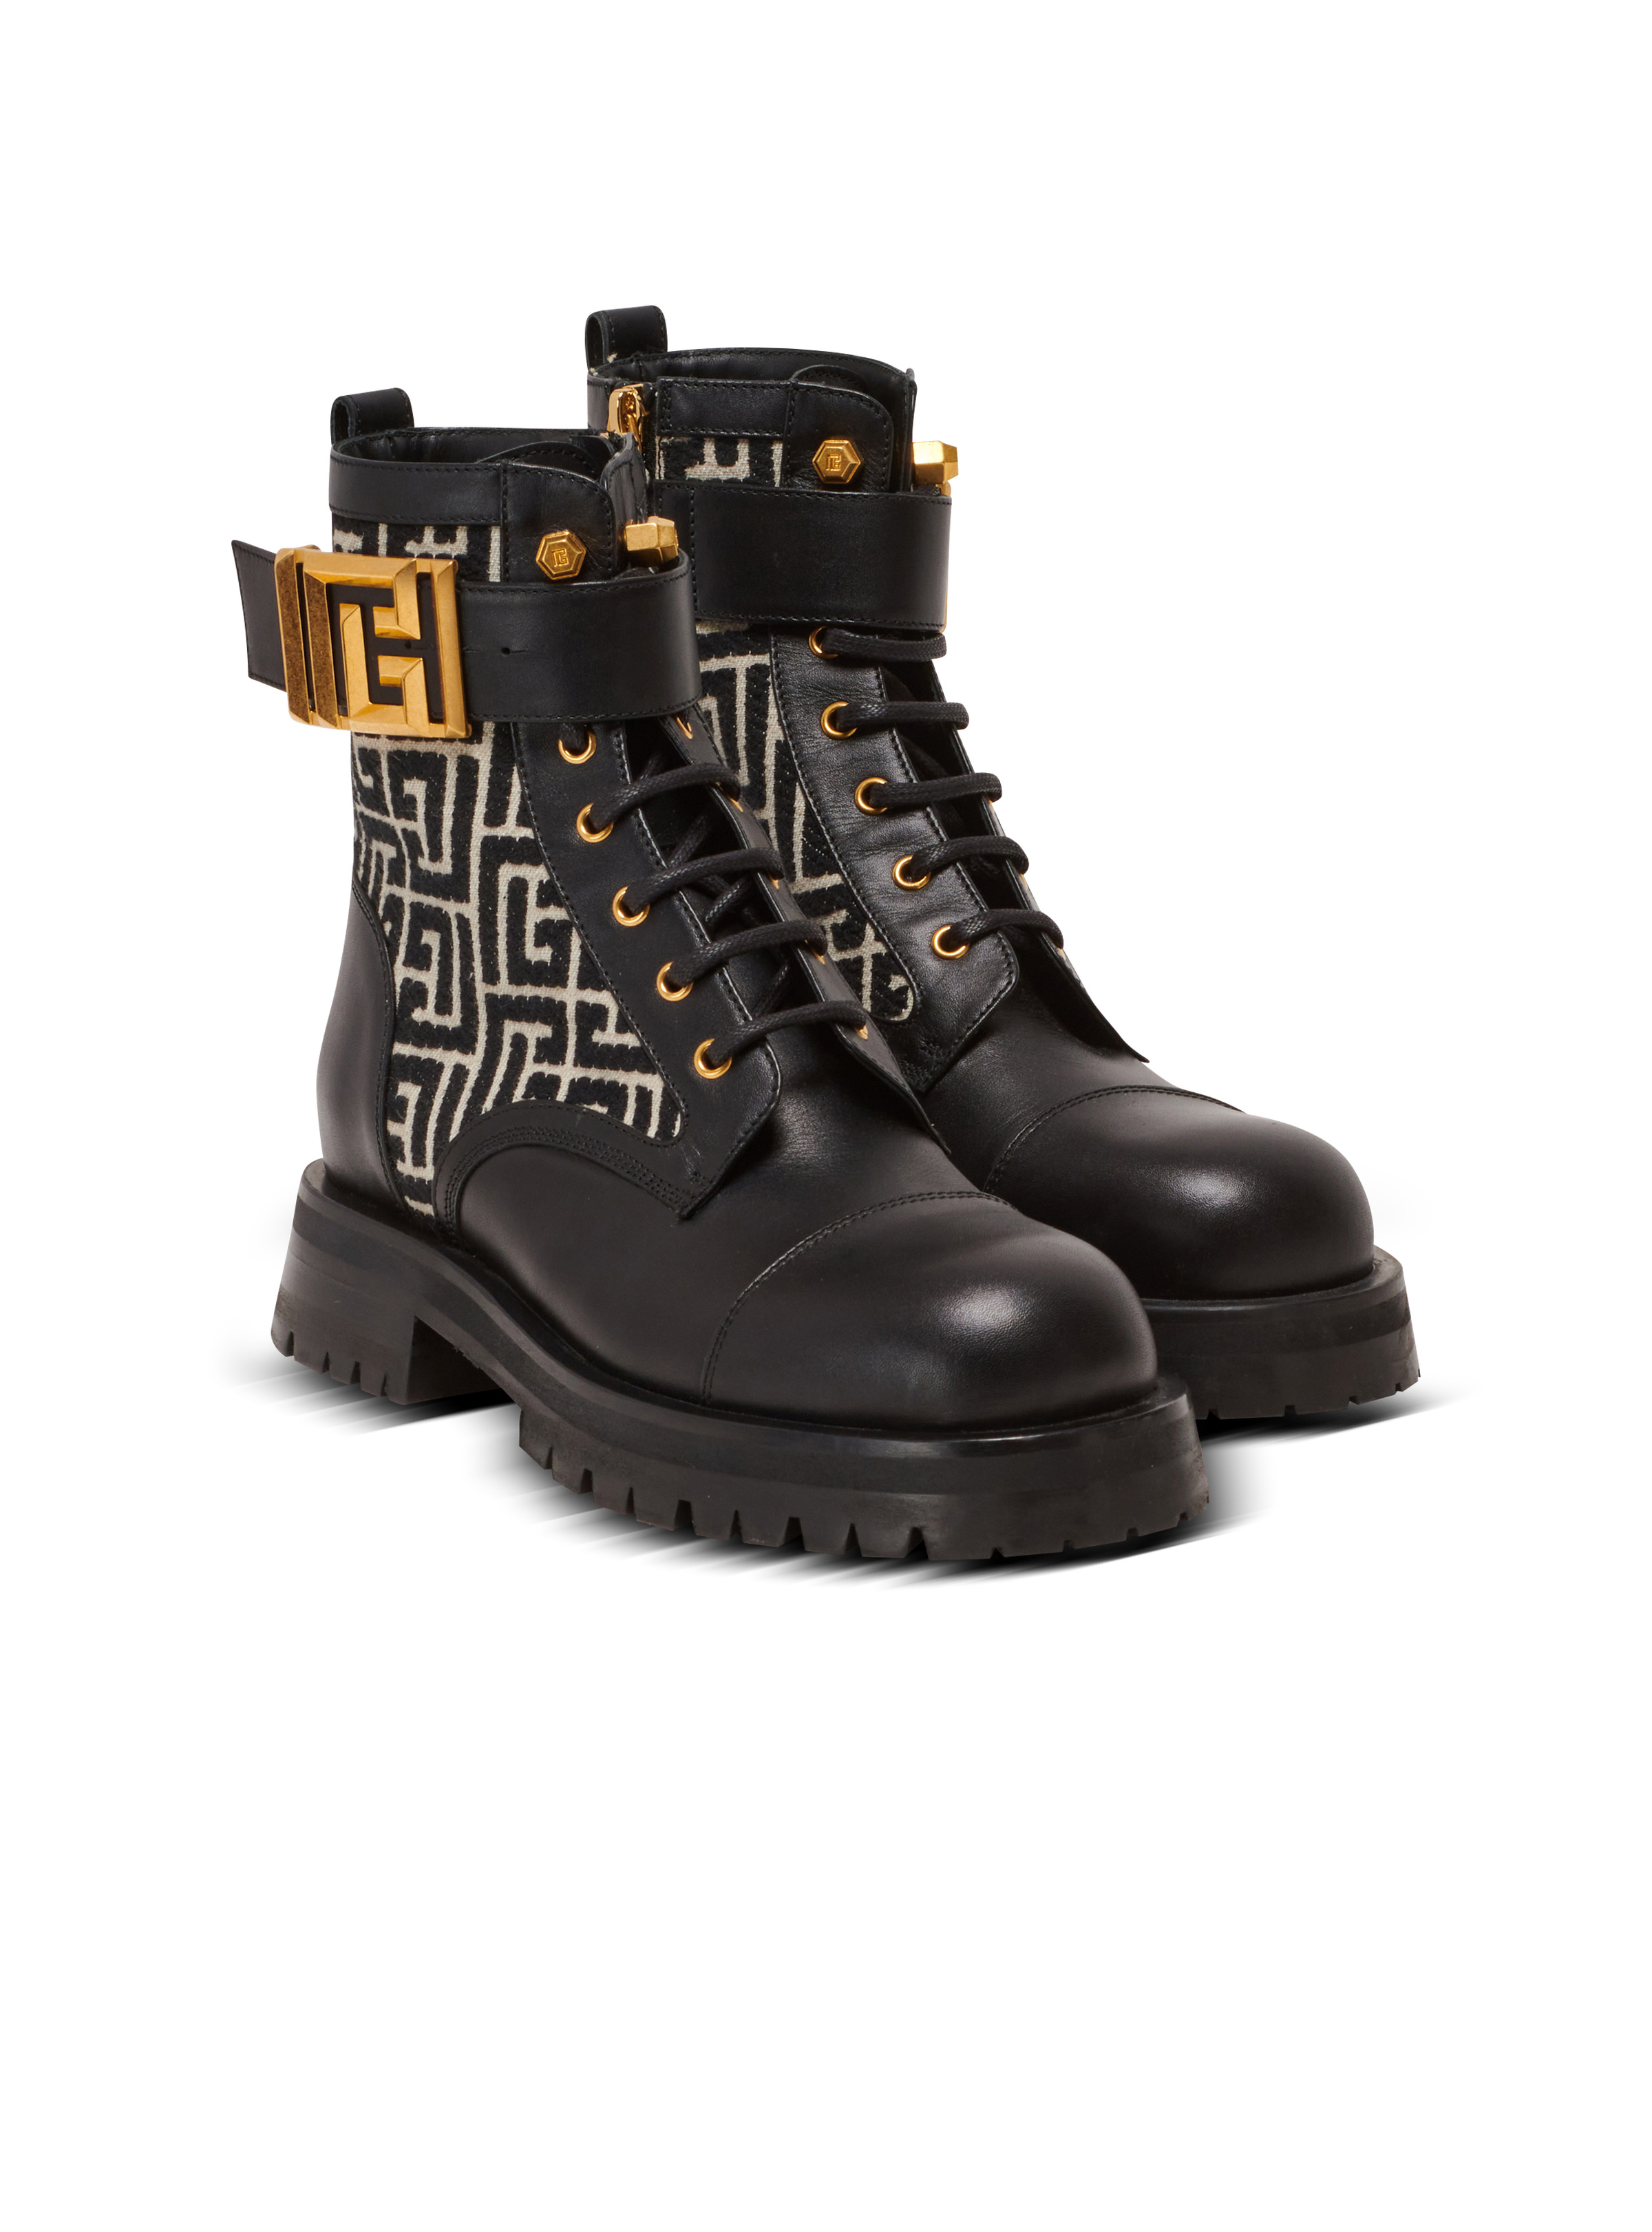 Charlie monogram jacquard and leather ranger boots - 2